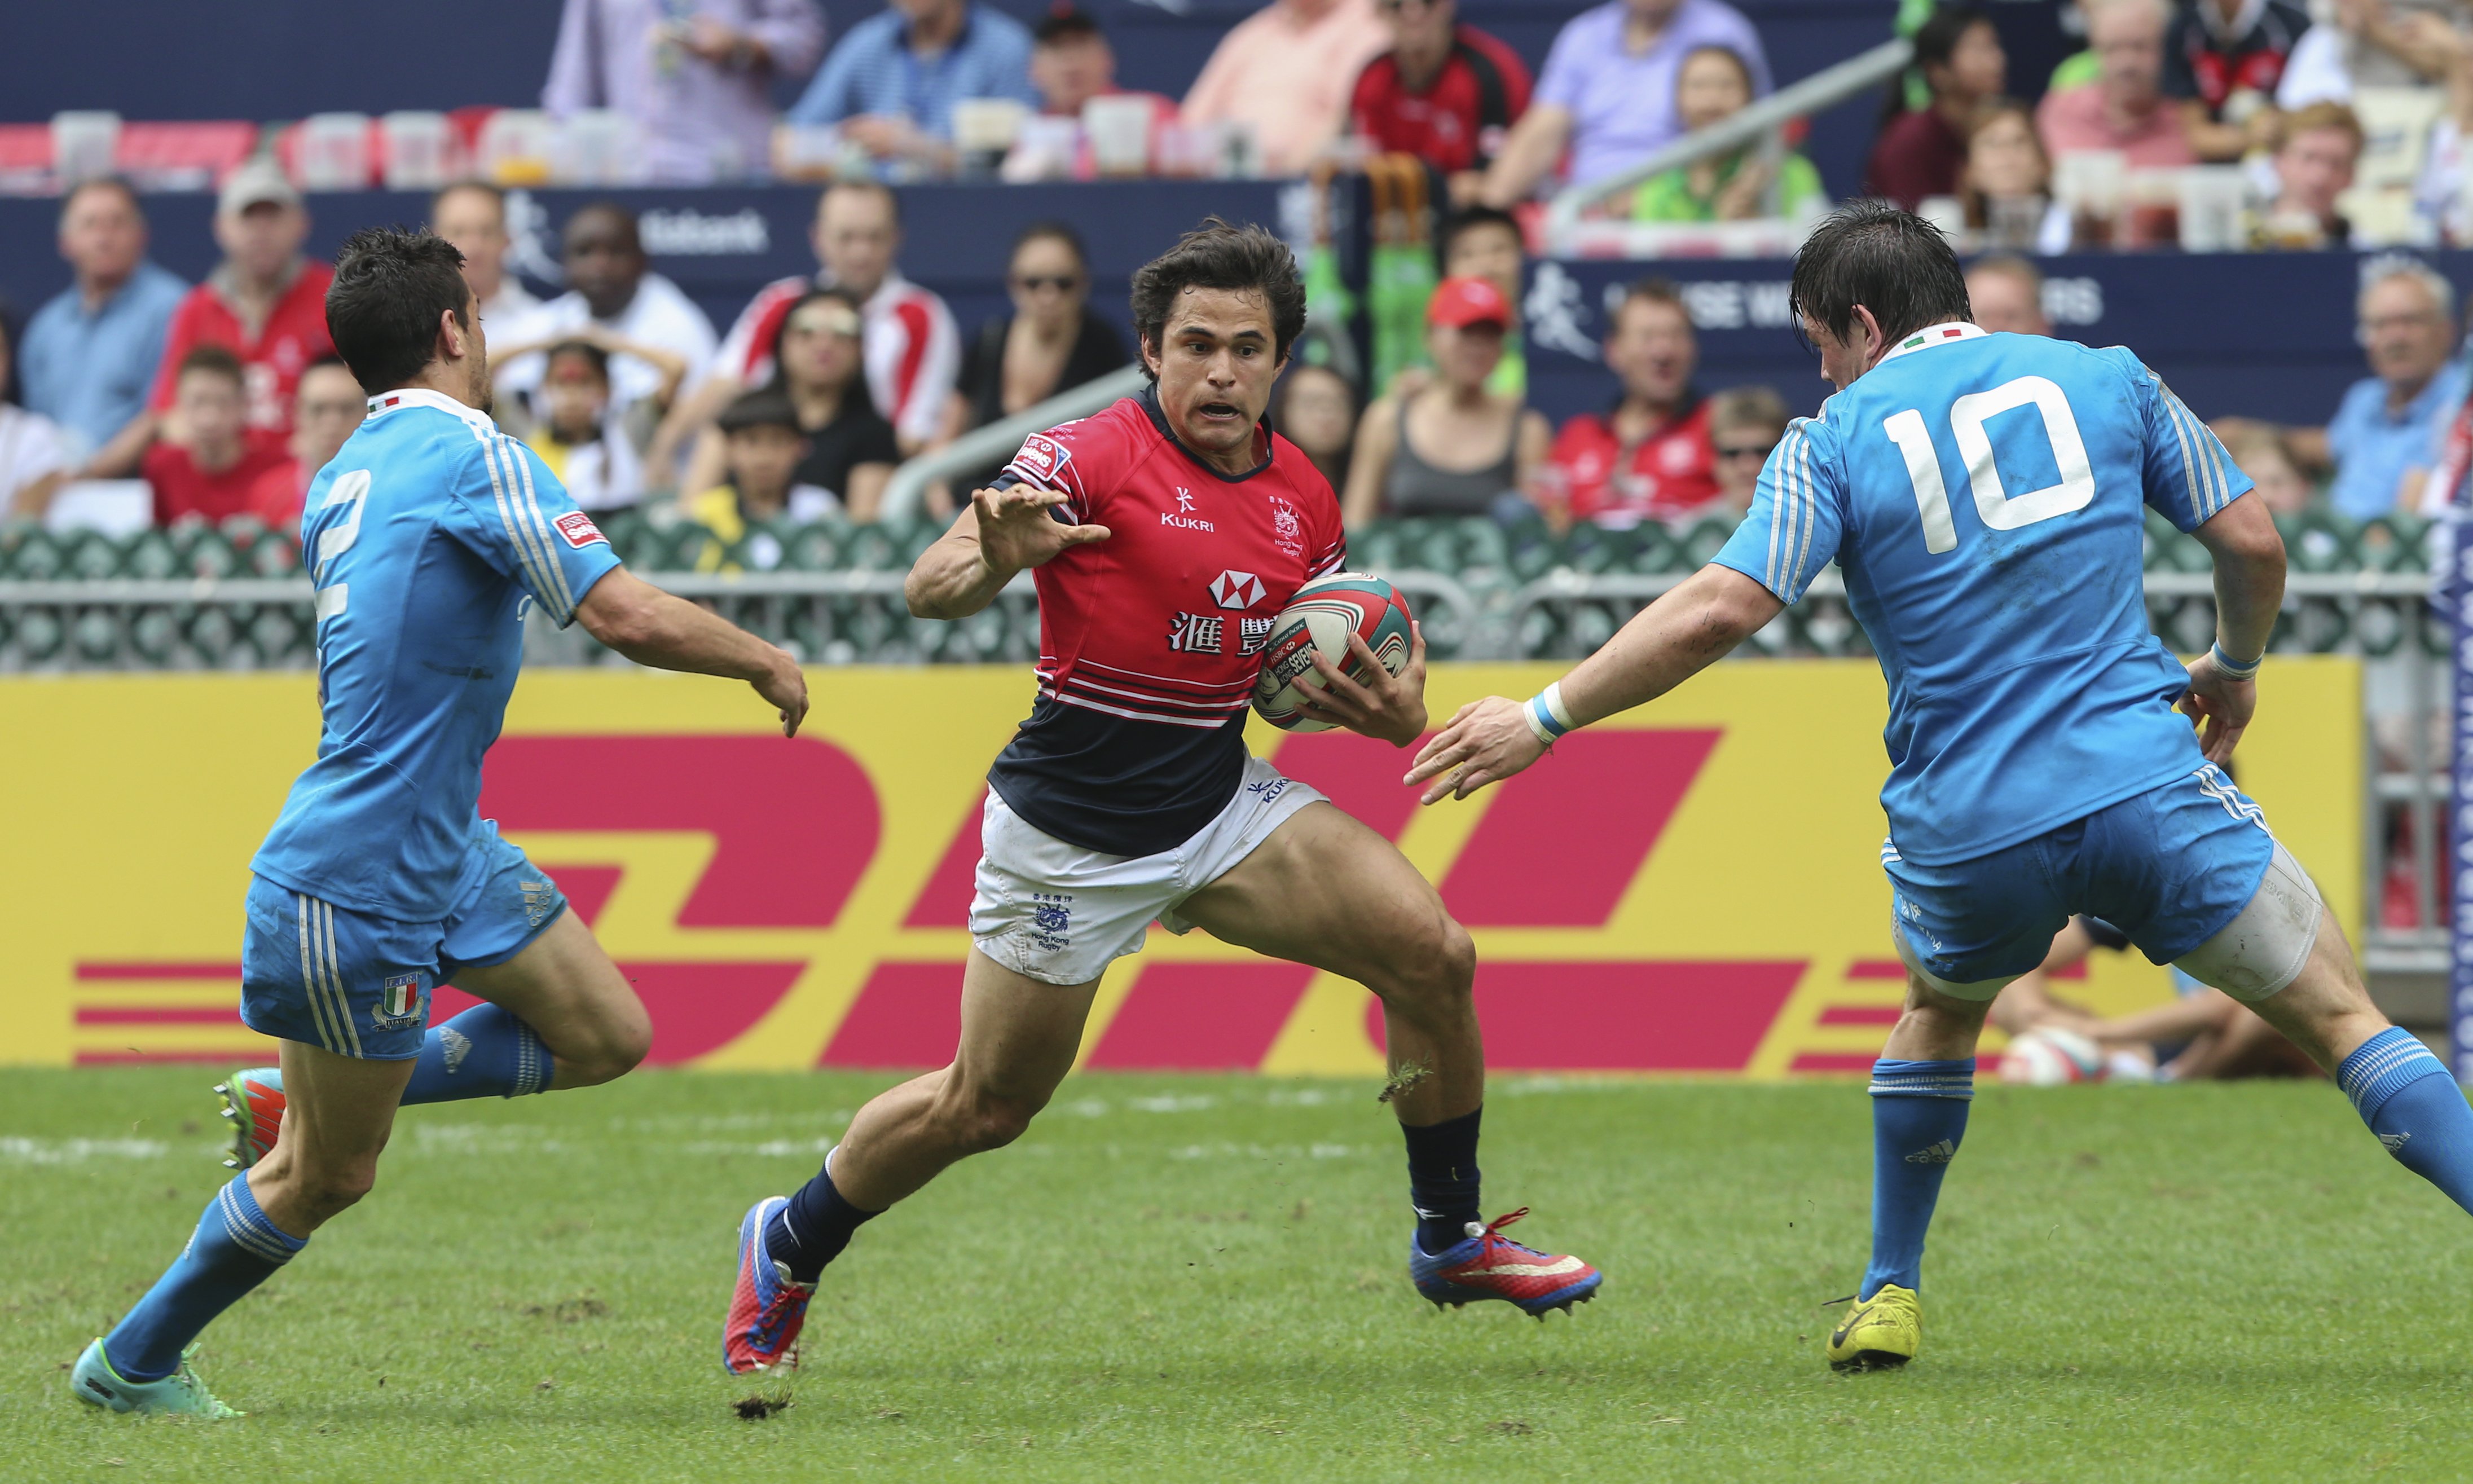 Rowan Varty is expected to recover from concussion and be available to take part in the Hong Kong Sevens next month. Photo: KY Cheng/SCMP